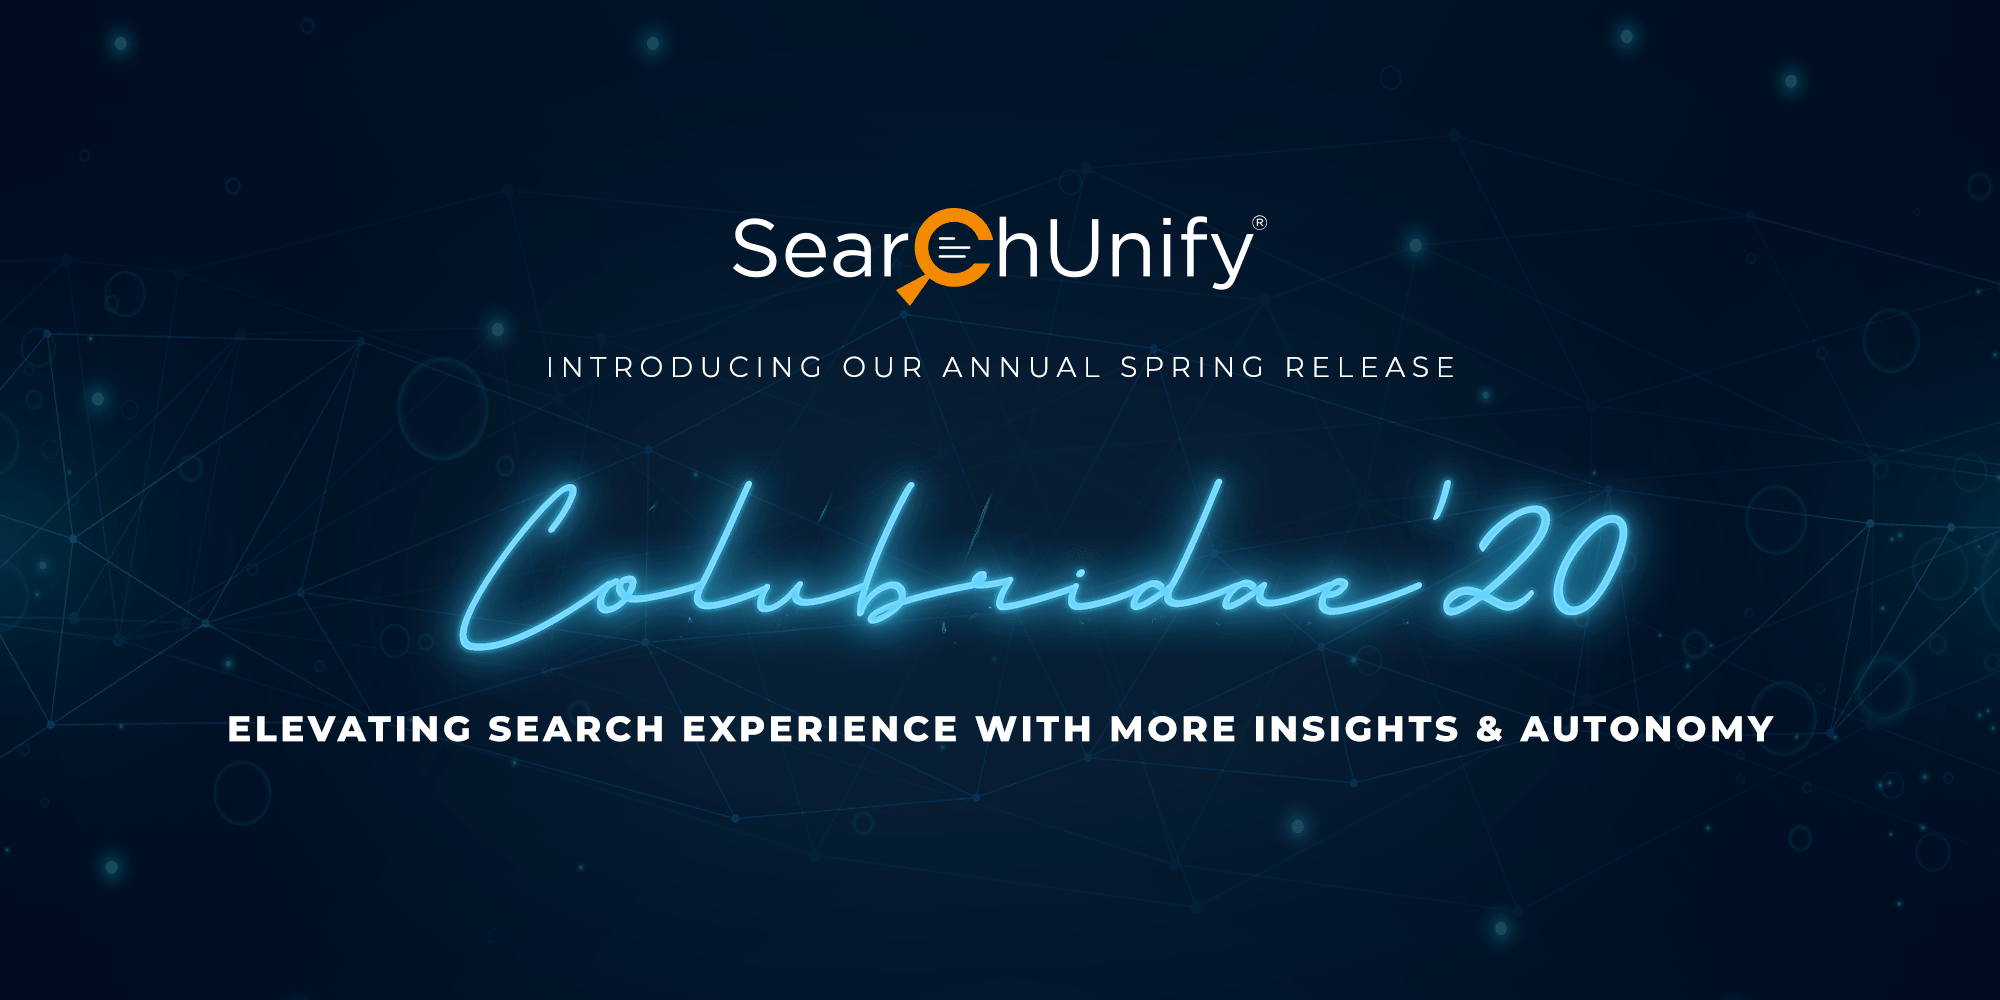 Colubridae ‘20: Elevating Search Experience with More Insights & Autonomy